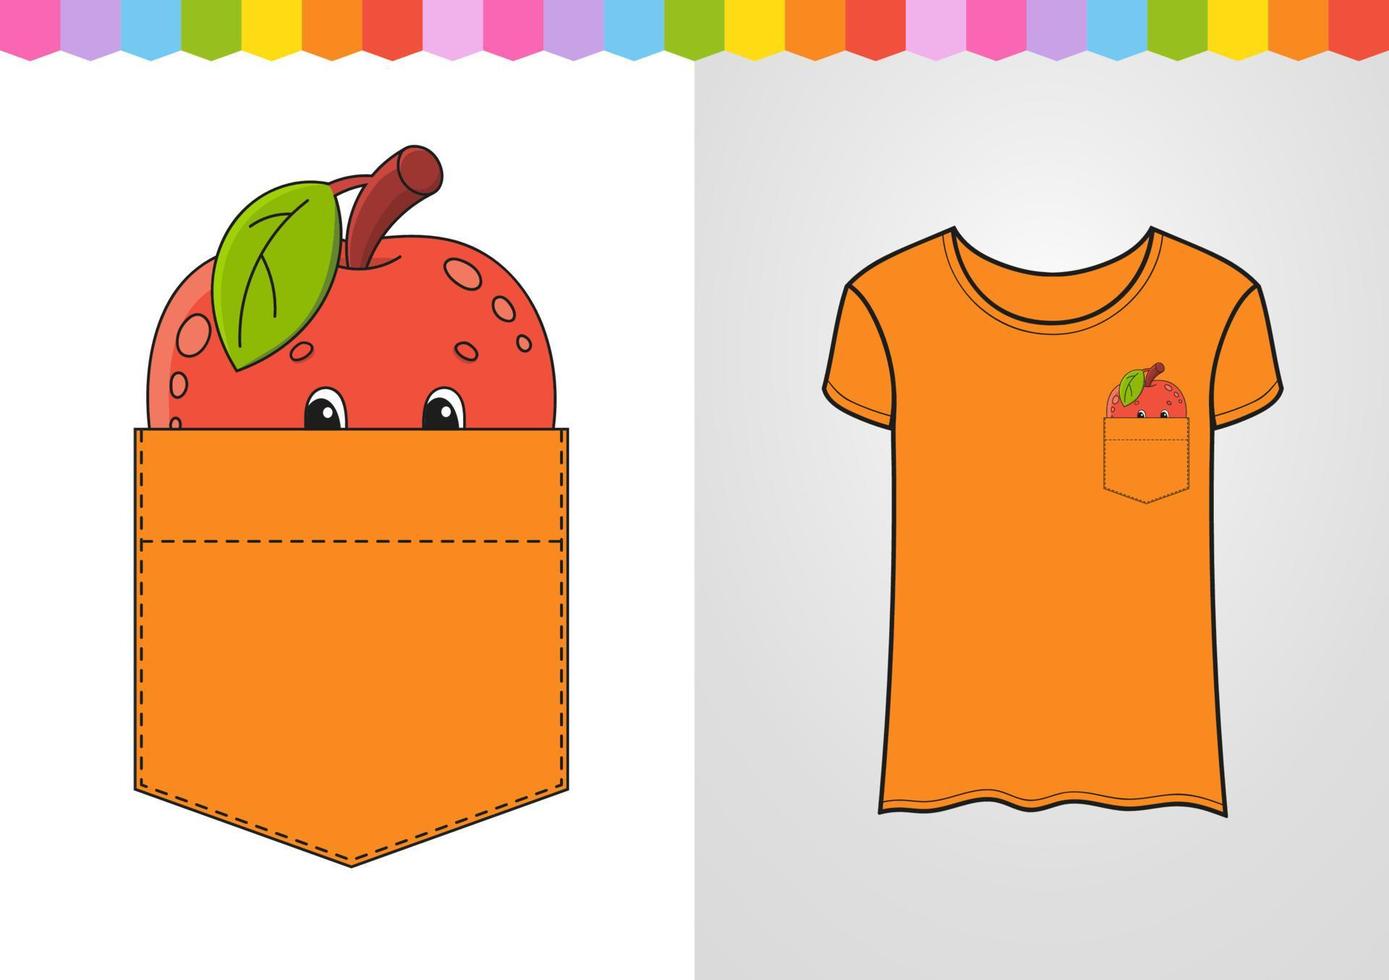 Apple in shirt pocket. Cute character. Colorful vector illustration. Cartoon style. Isolated on white background. Design element. Template for your shirts, books, stickers, cards, posters.